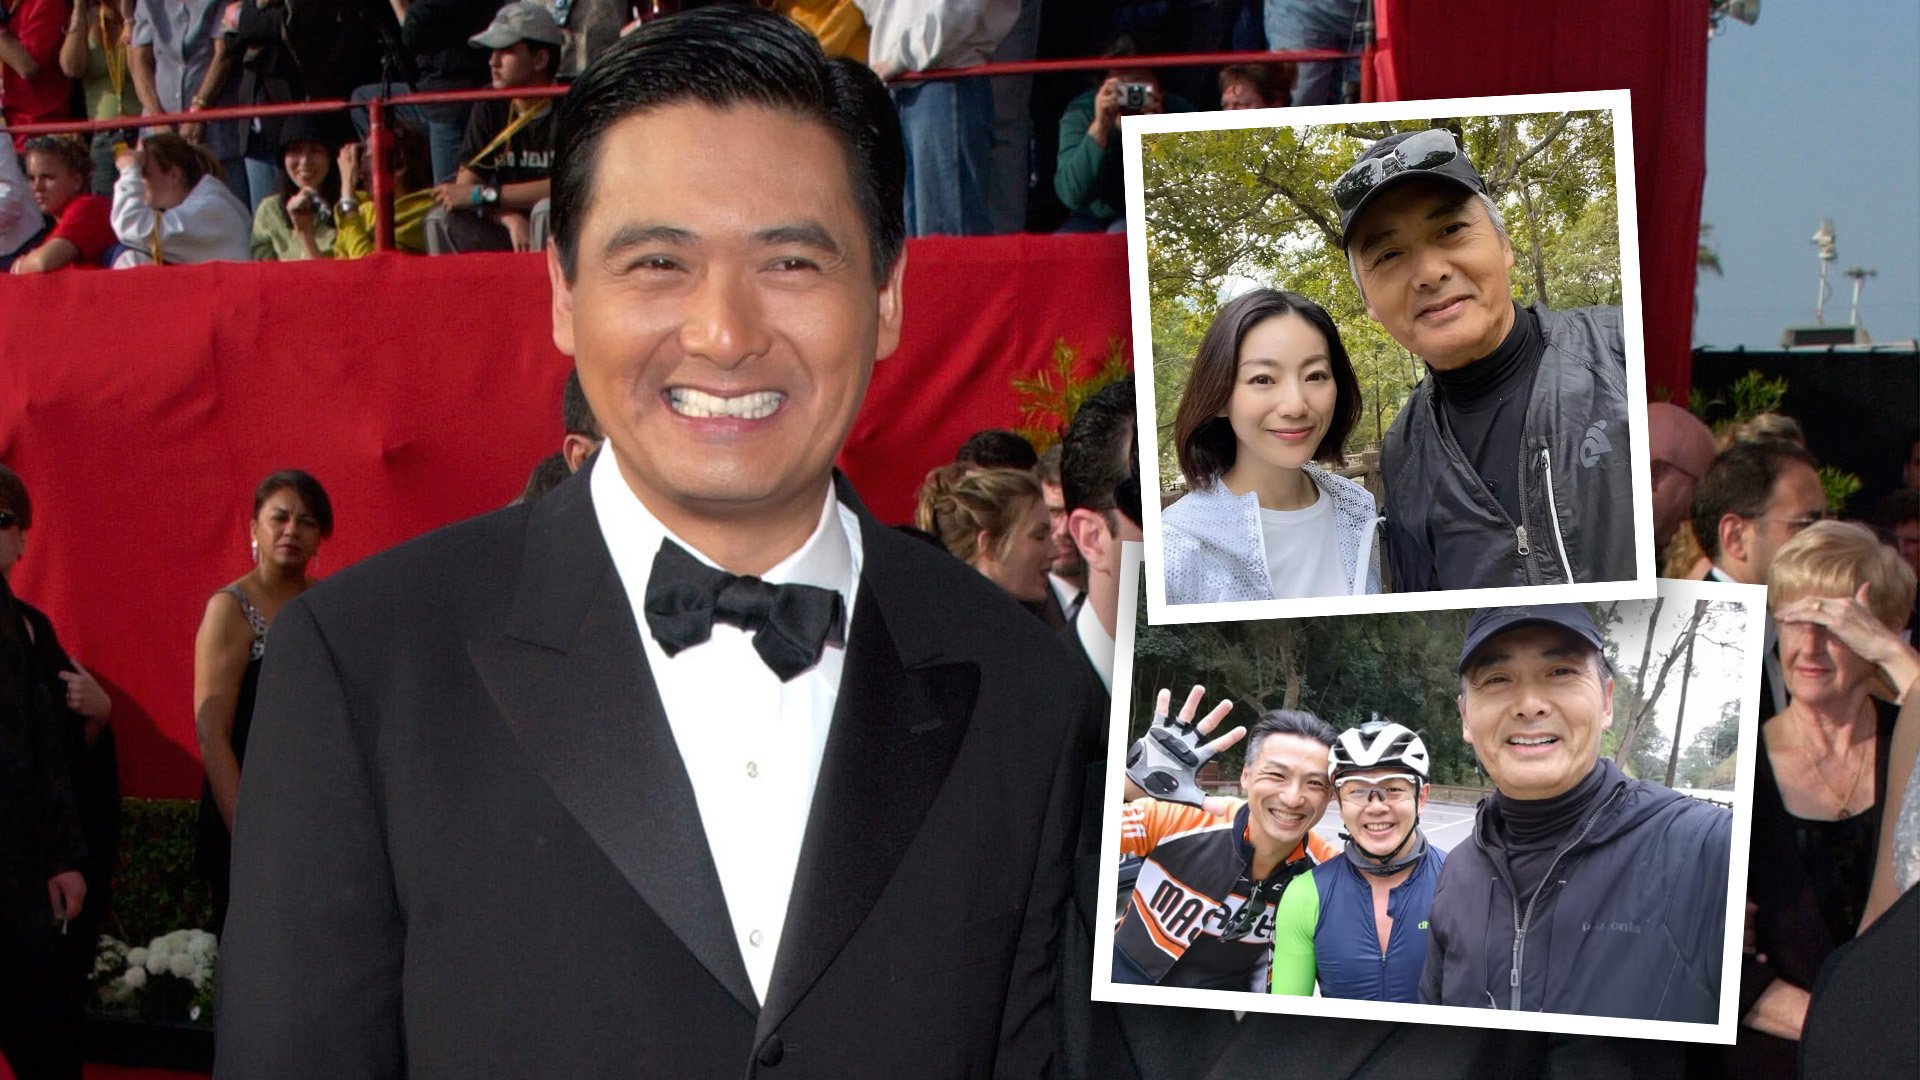 Fans of Hong Kong acting icon Chow Yun-fat have reacted with delight to an interview the star has given in which he spoke of his love for the city, its people and its distinctive Cantonese dialect. Photo: SCMP composite